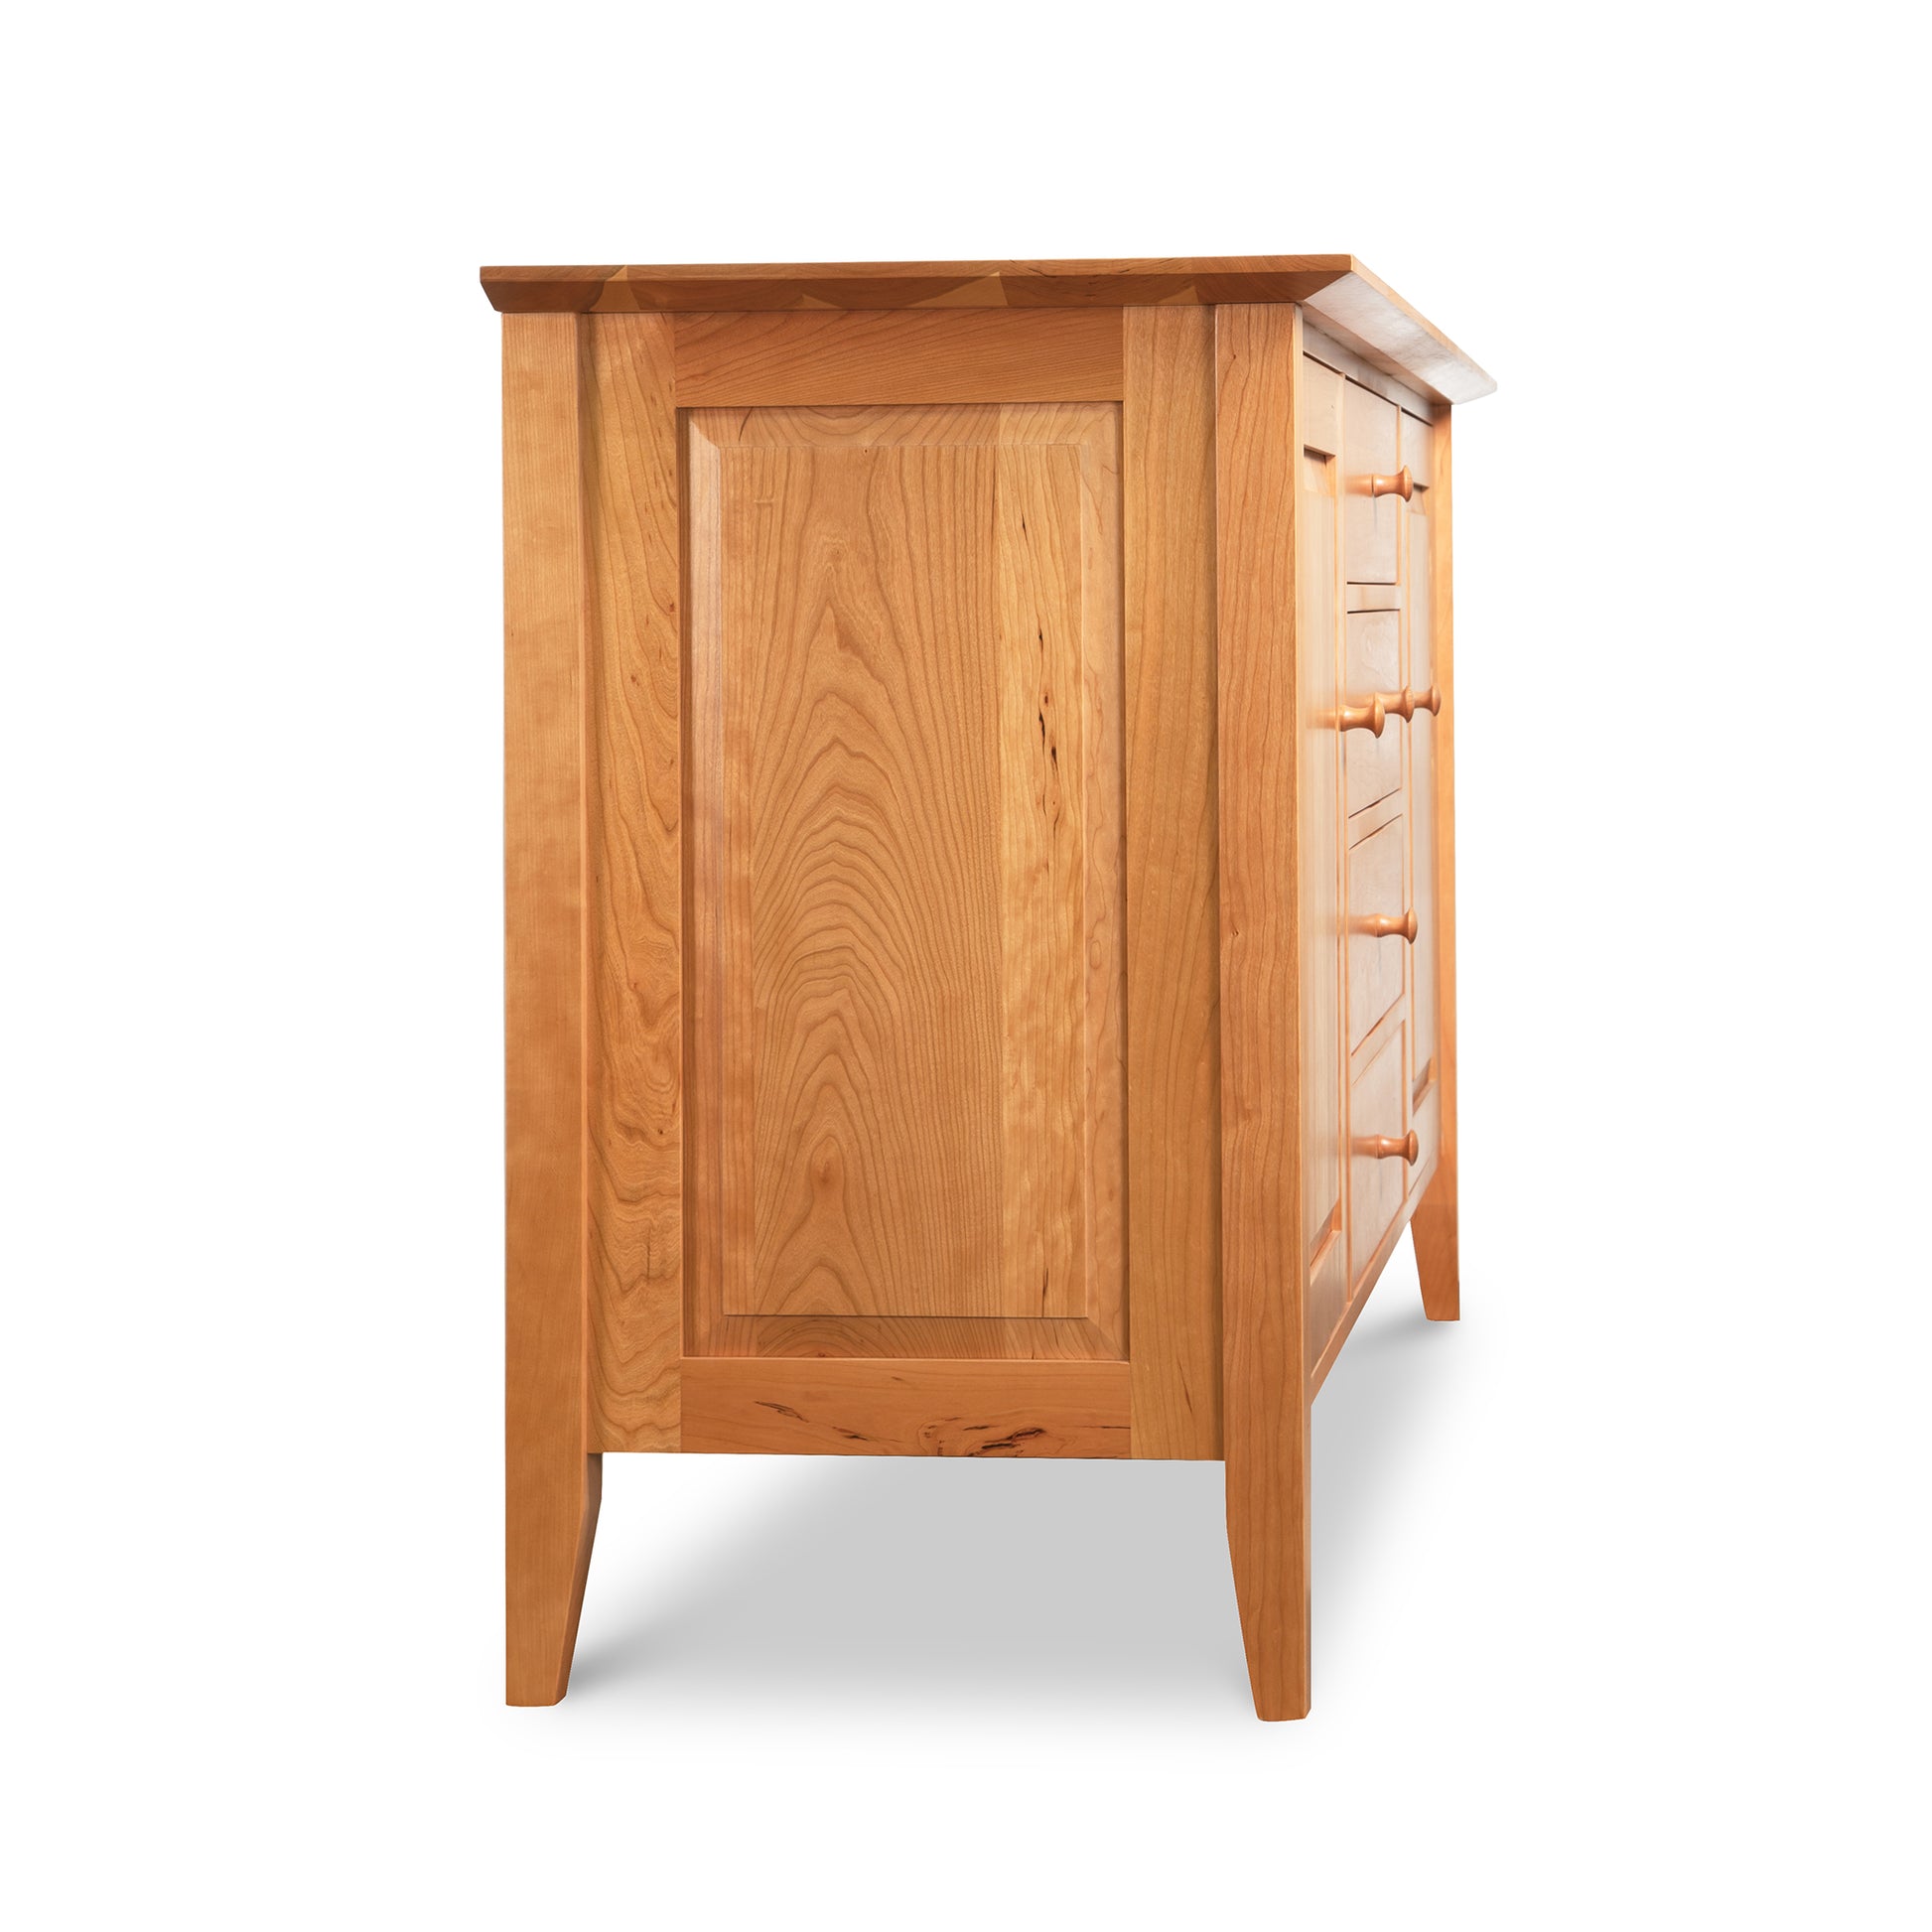 A Lyndon Furniture handmade wooden Classic Shaker Large Buffet with drawers, crafted from fine hardwoods.